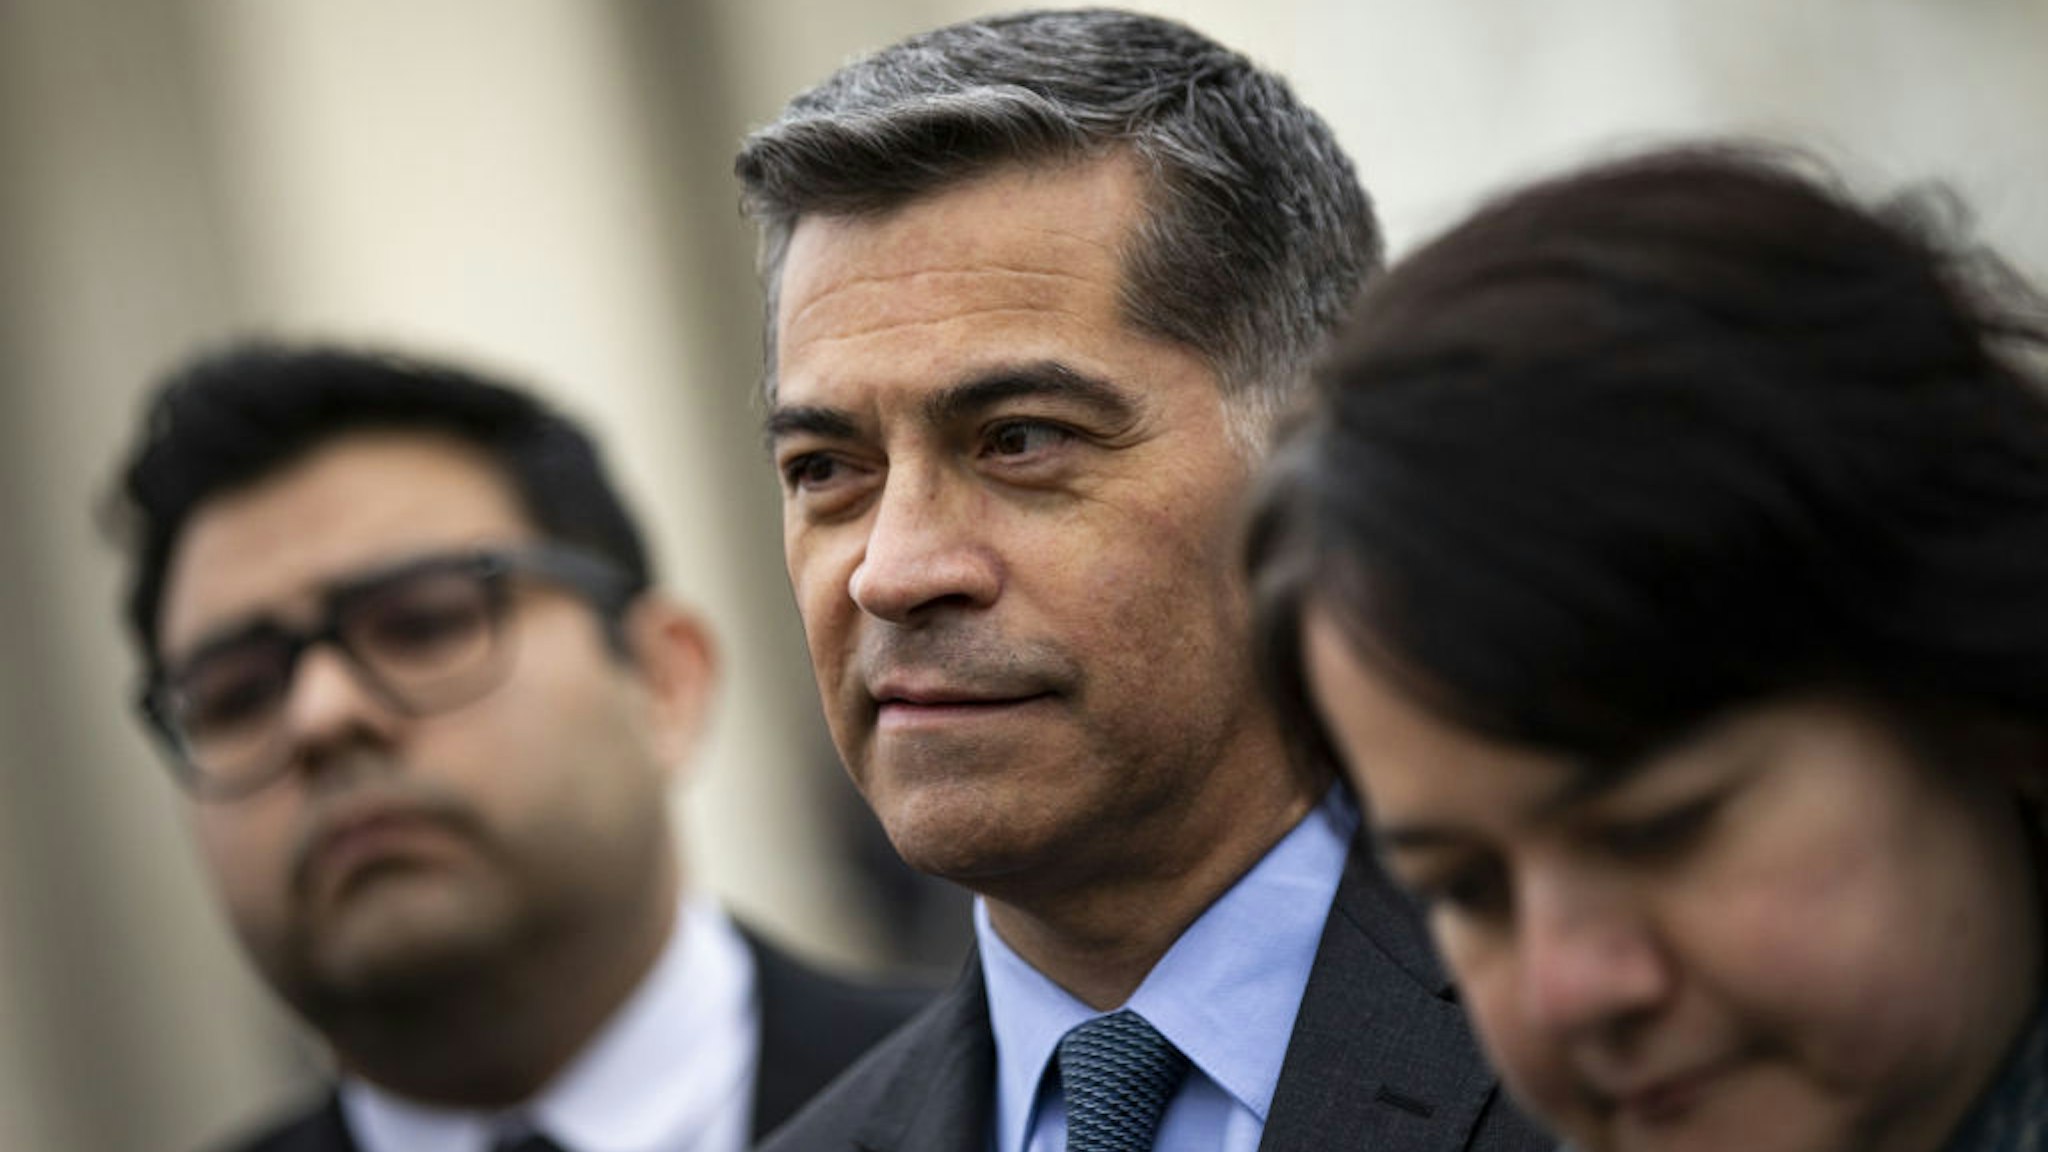 Xavier Becerra, California's attorney general, listens during a news conference outside the Supreme Court in Washington, D.C., U.S., on Tuesday, Nov. 12, 2019. The Supreme Court hears arguments today over the Obama-era Deferred Action for Childhood Arrivals program (DACA) which the Trump administration wants to undo. Photographer: Al Drago/Bloomberg via Getty Images